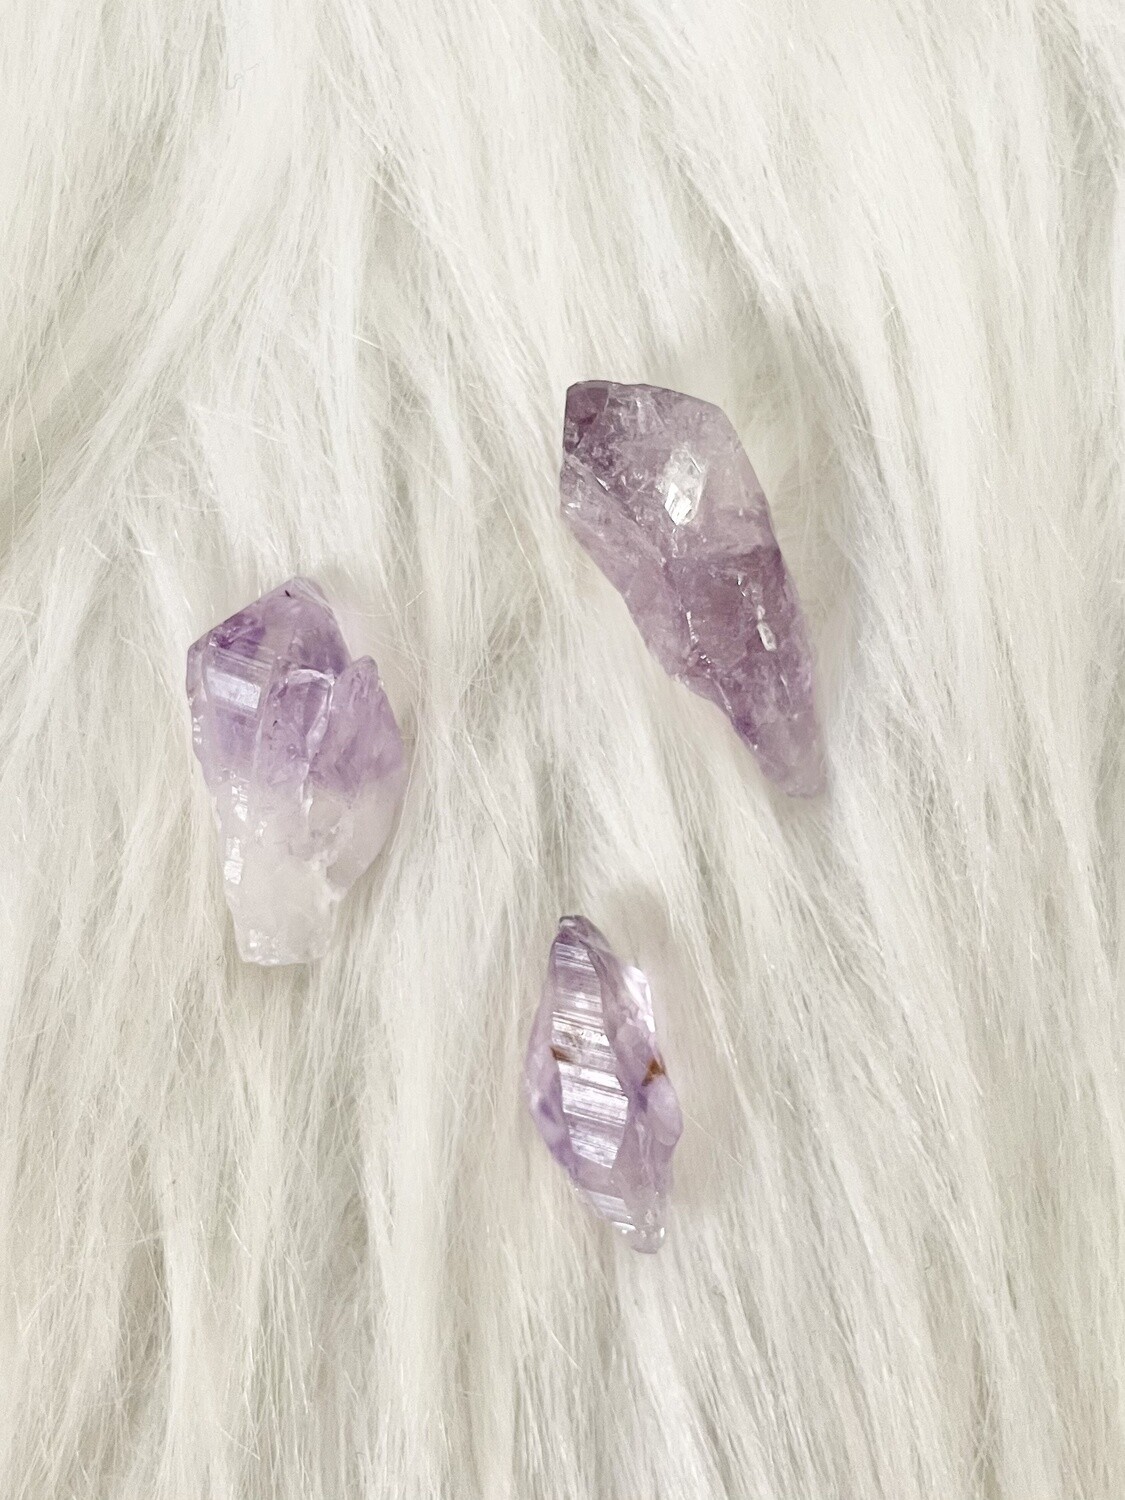 Famous 3 Raw Amethyst Points